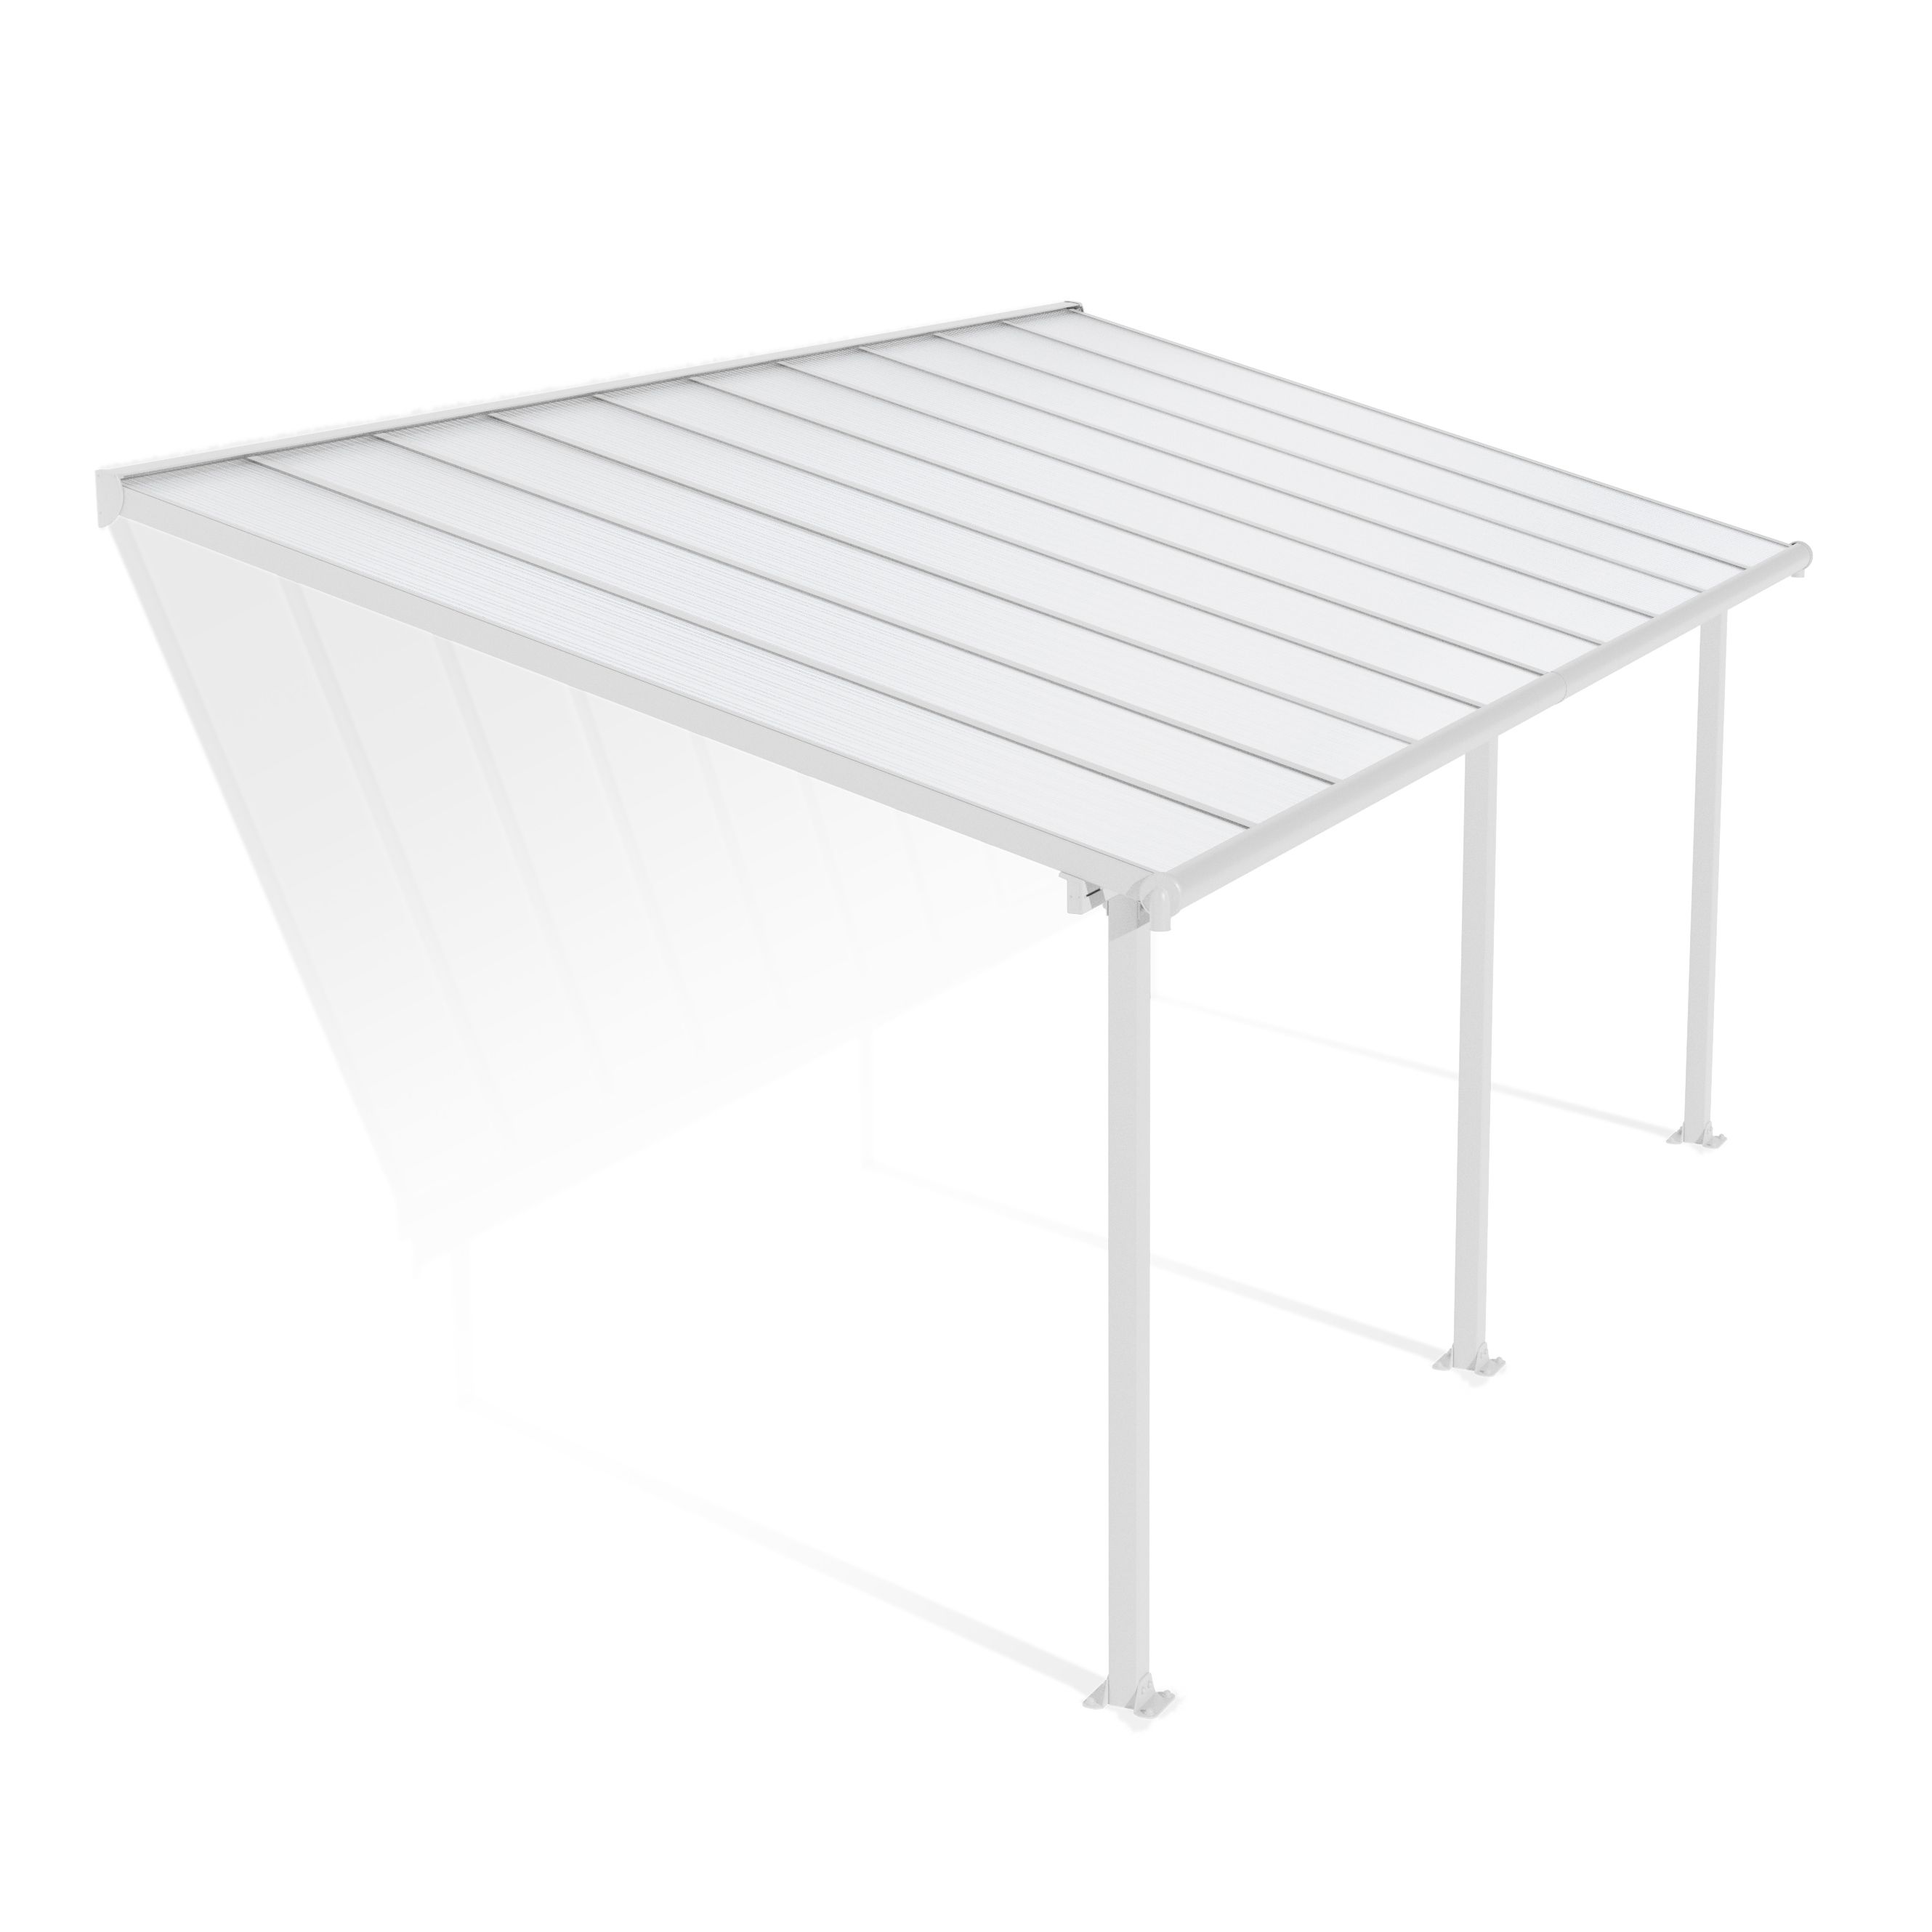 Olympia White Patio cover (H)3050mm (W)2950mm (D)6100mm